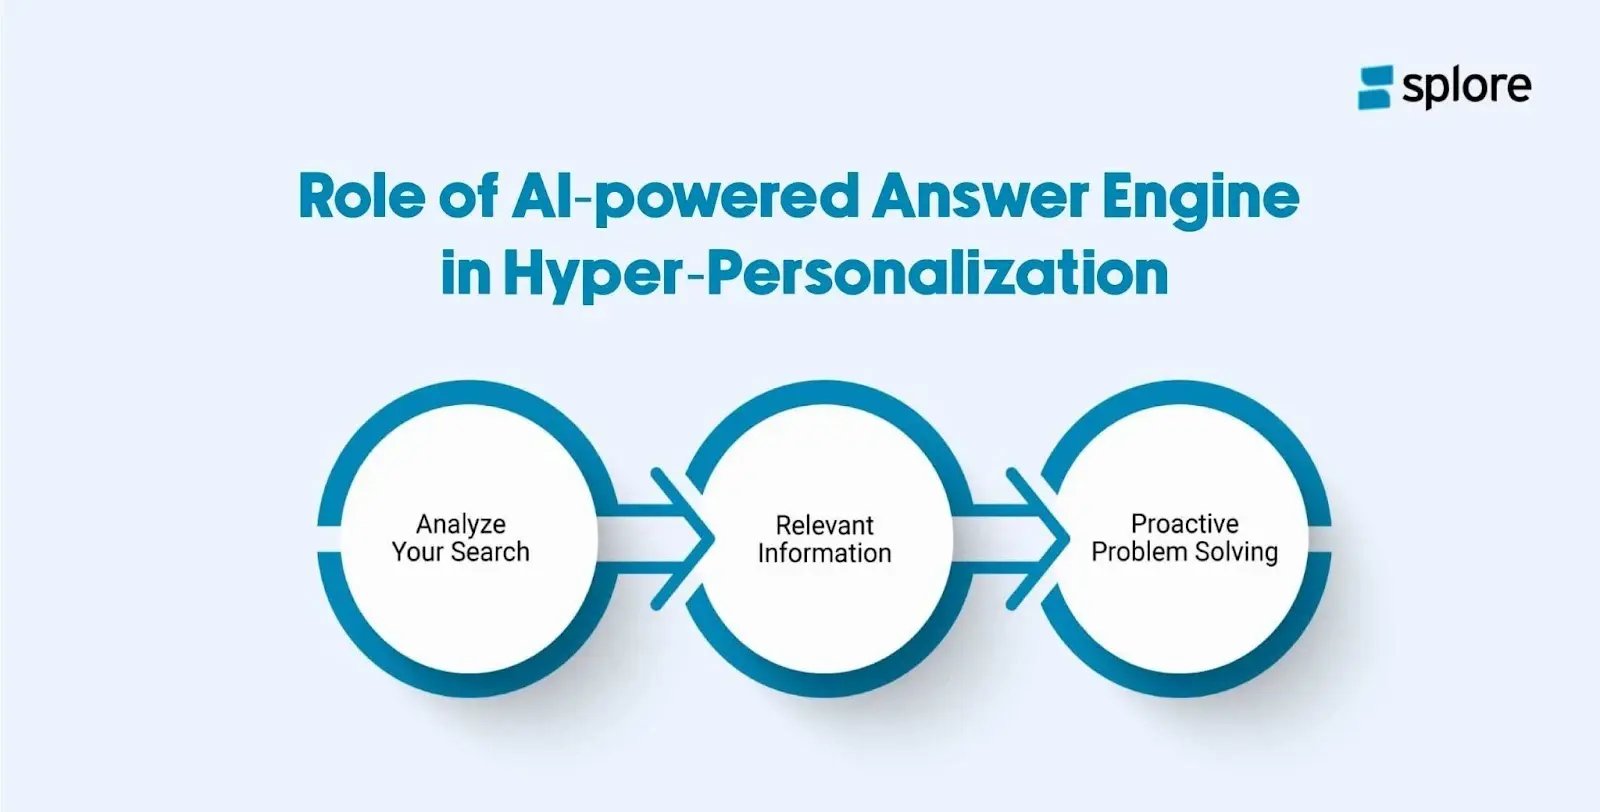 Role of AI-powered answer engine in hyper-personalization